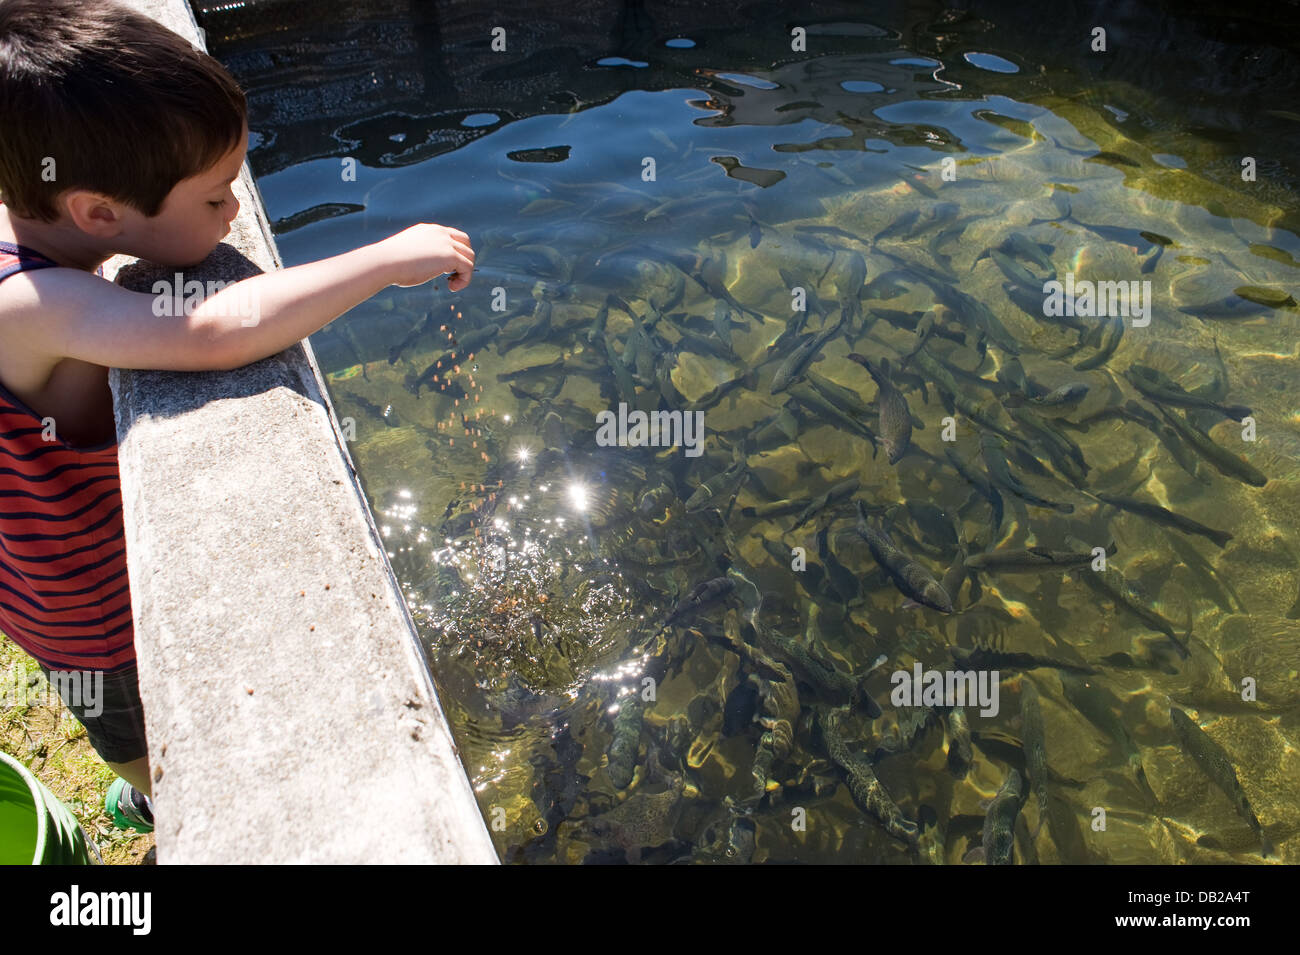 A young boy feeds salmon at the fish hatchery in Marblemount, Washington. Stock Photo